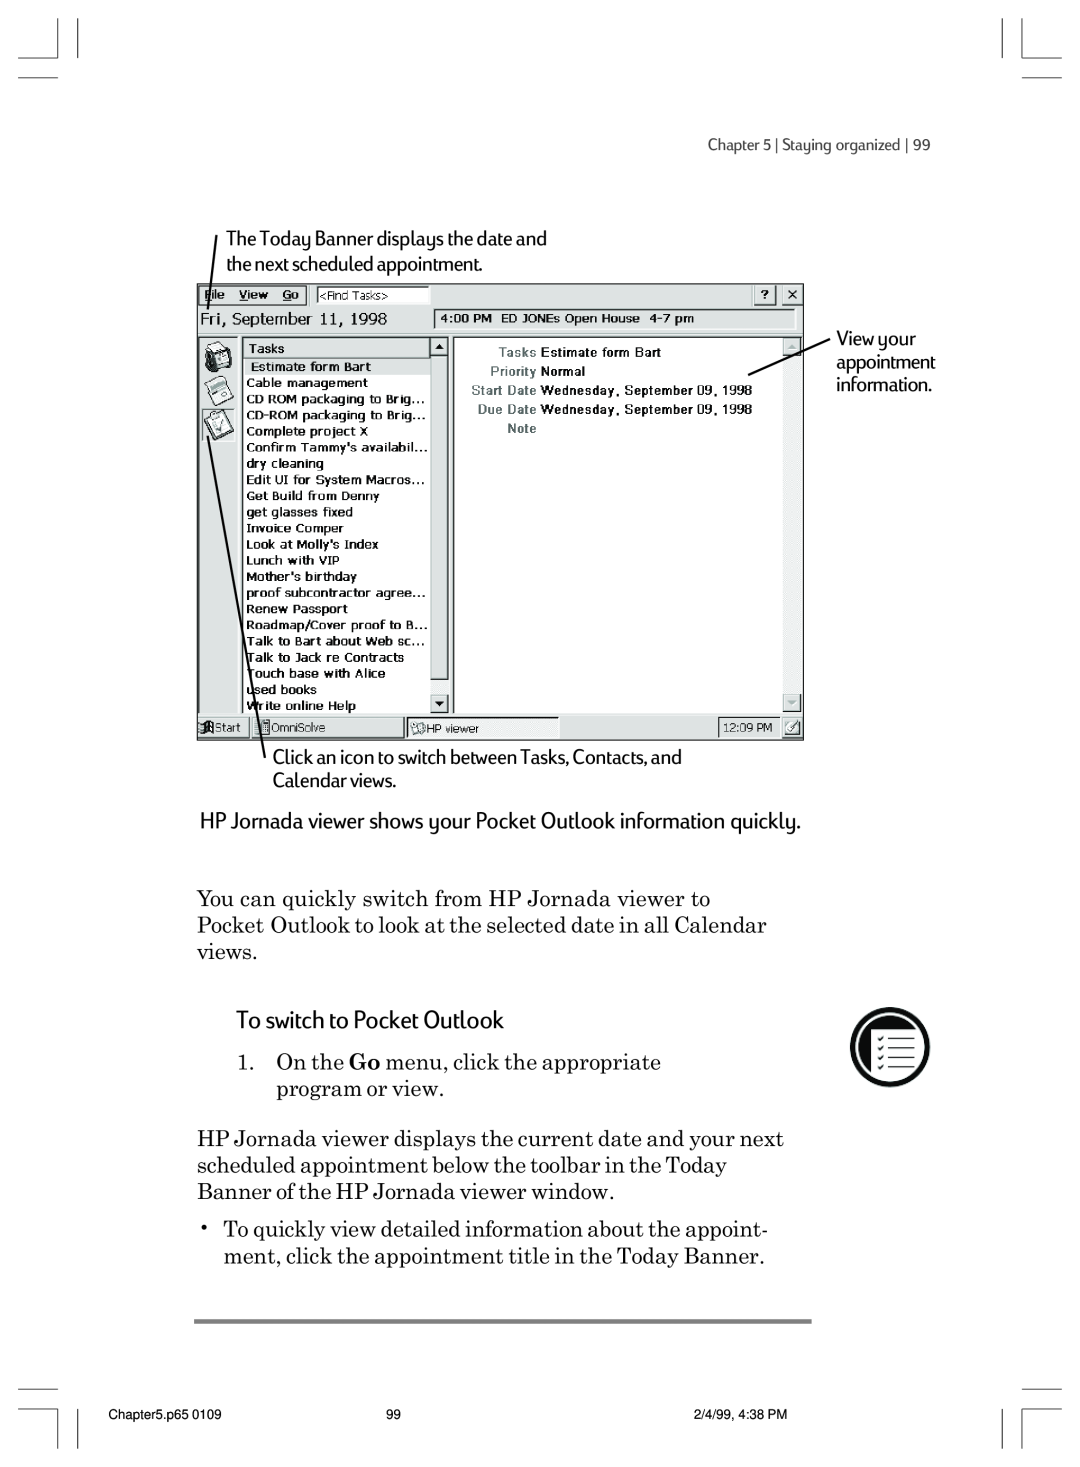 HP 820 E manual To switch to Pocket Outlook, HP Jornada viewer shows your Pocket Outlook information quickly 